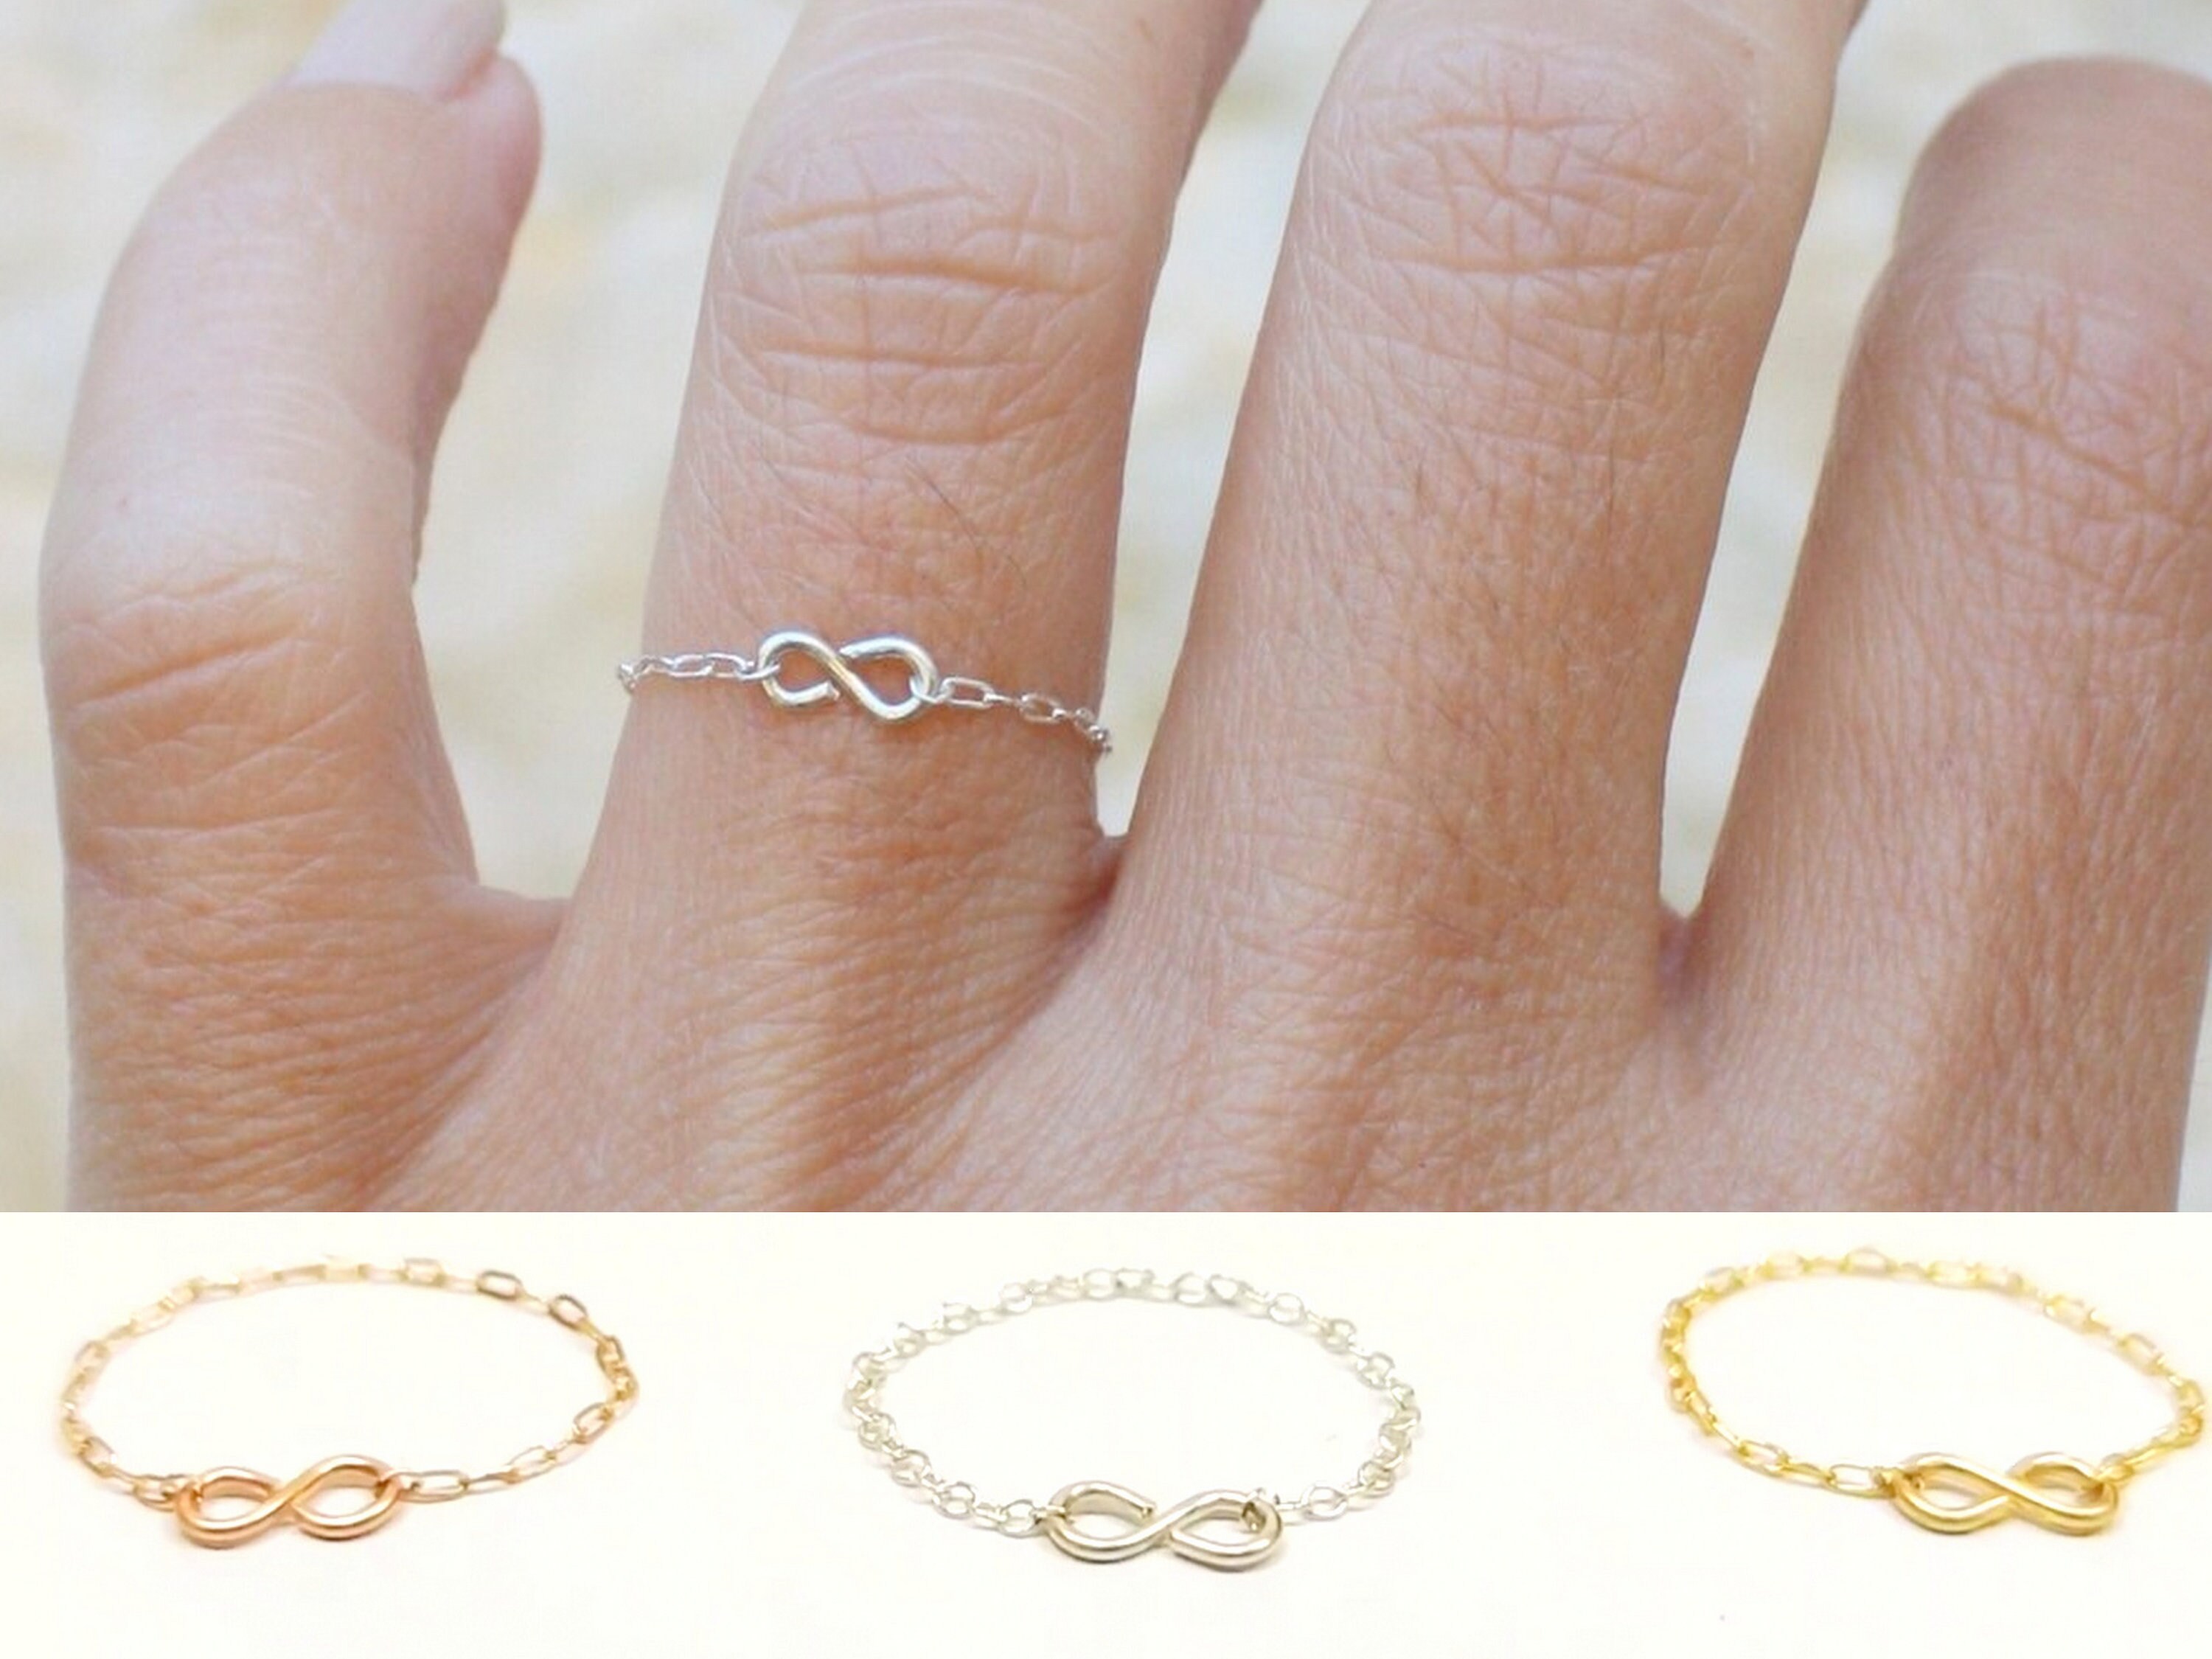  JULJEWELRY Chain Ring 14k Gold filled Silver or Rose